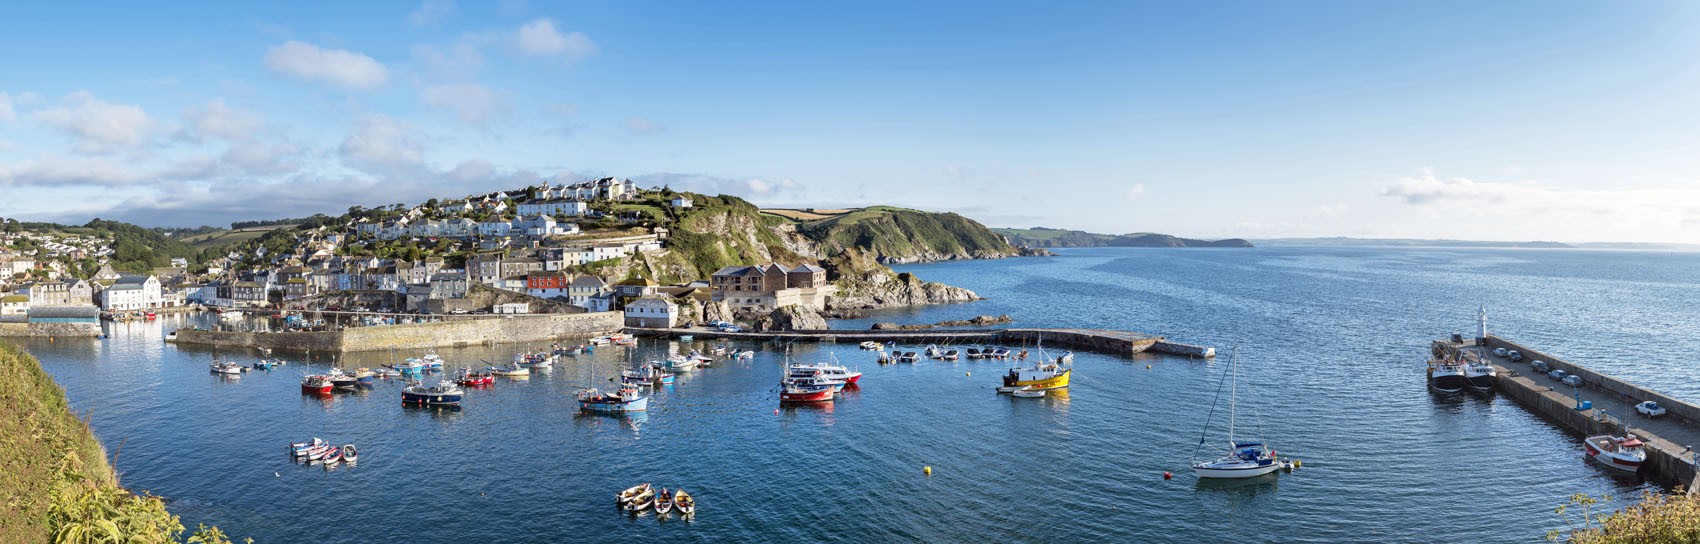 Mevagissey in Cornwall. Photograph by HELEN HOTSON